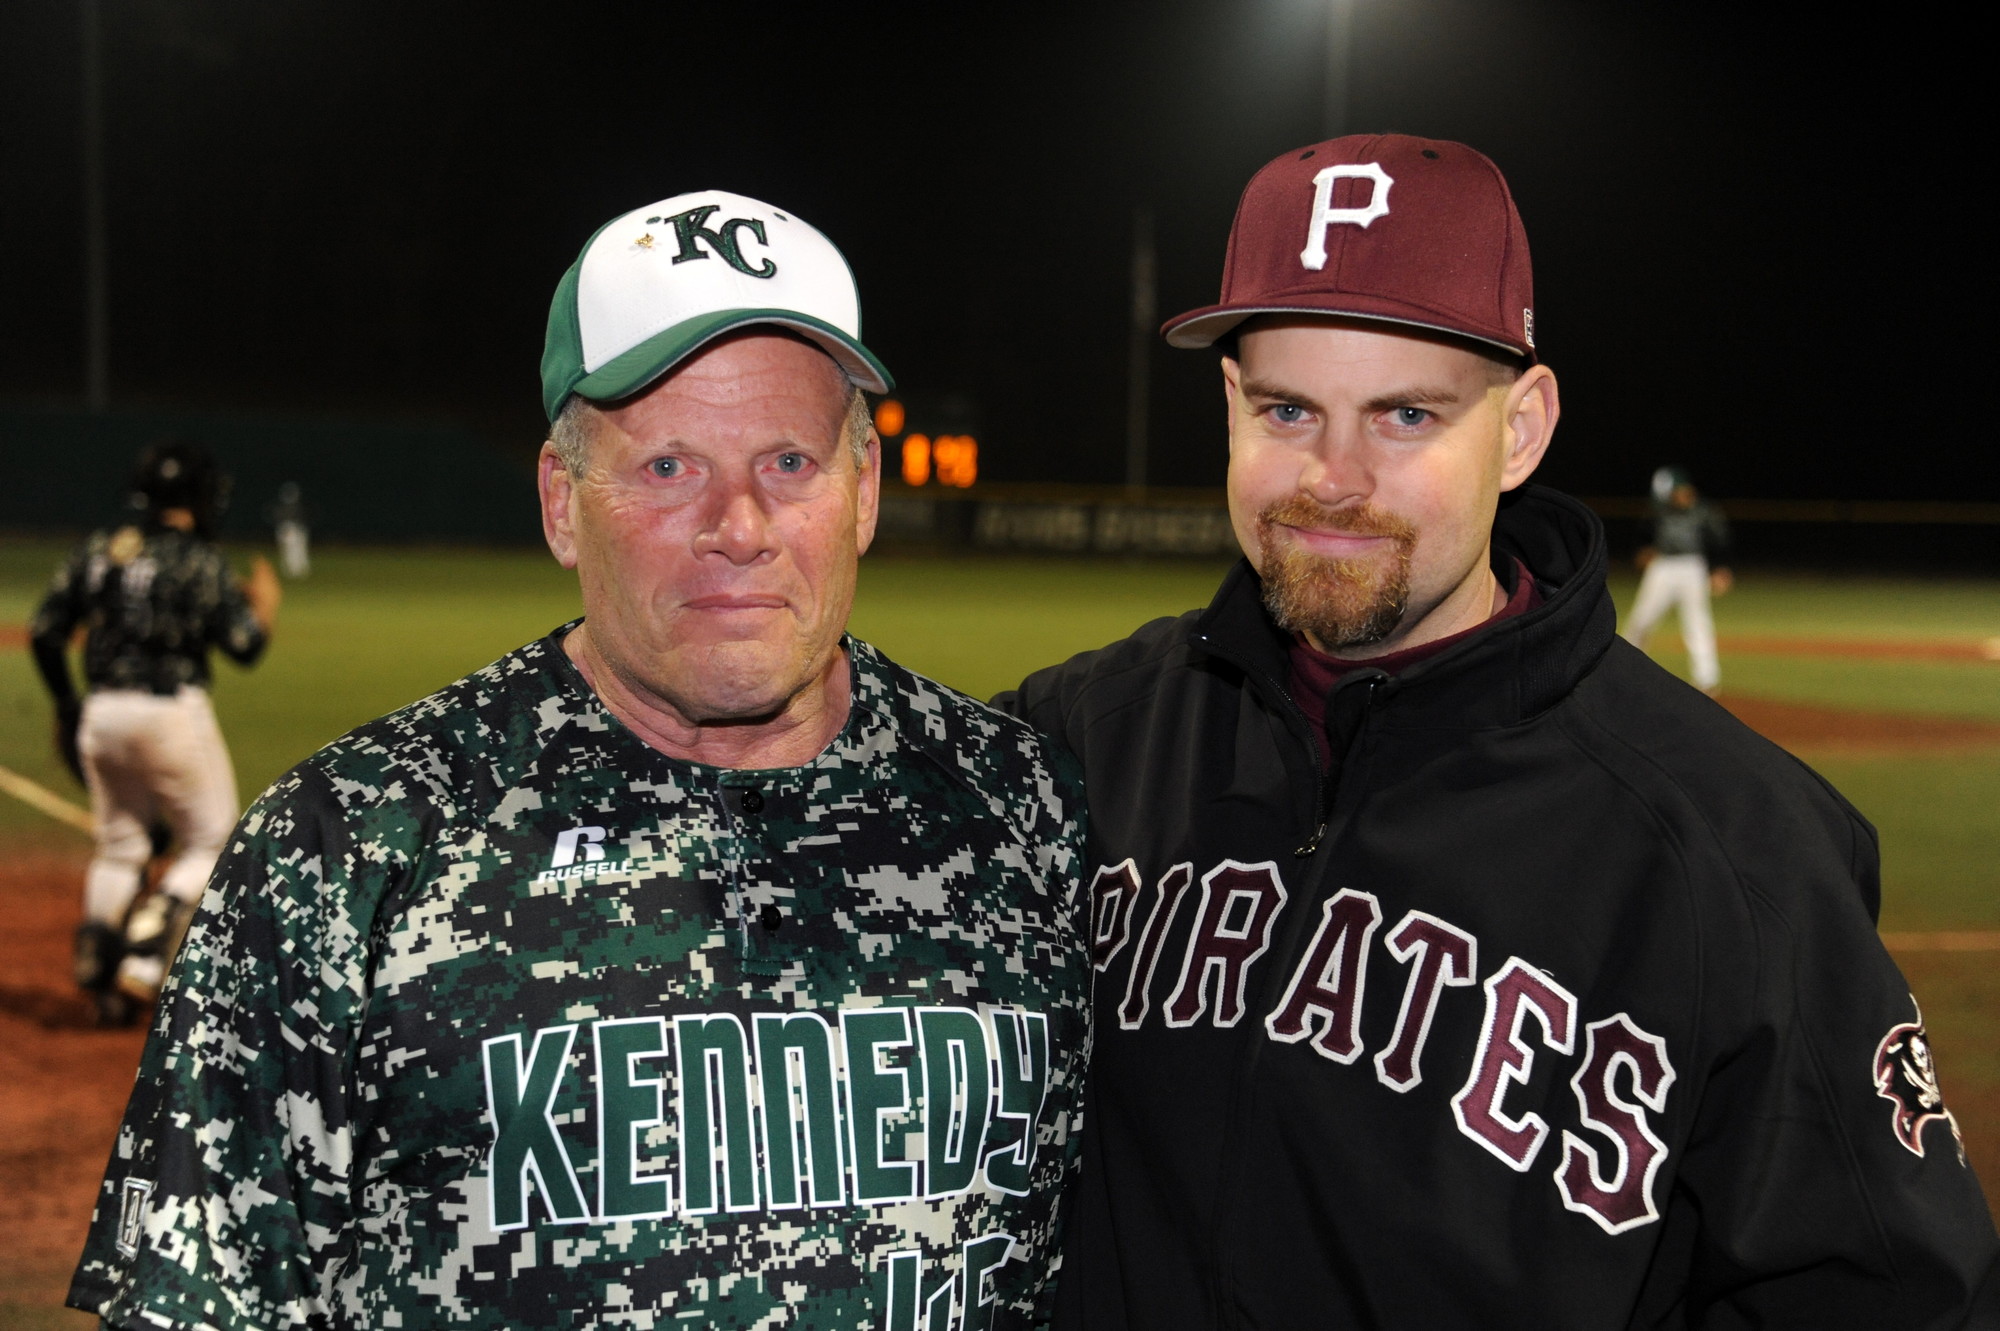 Eric Passman and Bill Murphy, Kennedy and Mepham’s respective baseball coaches, organized the event.